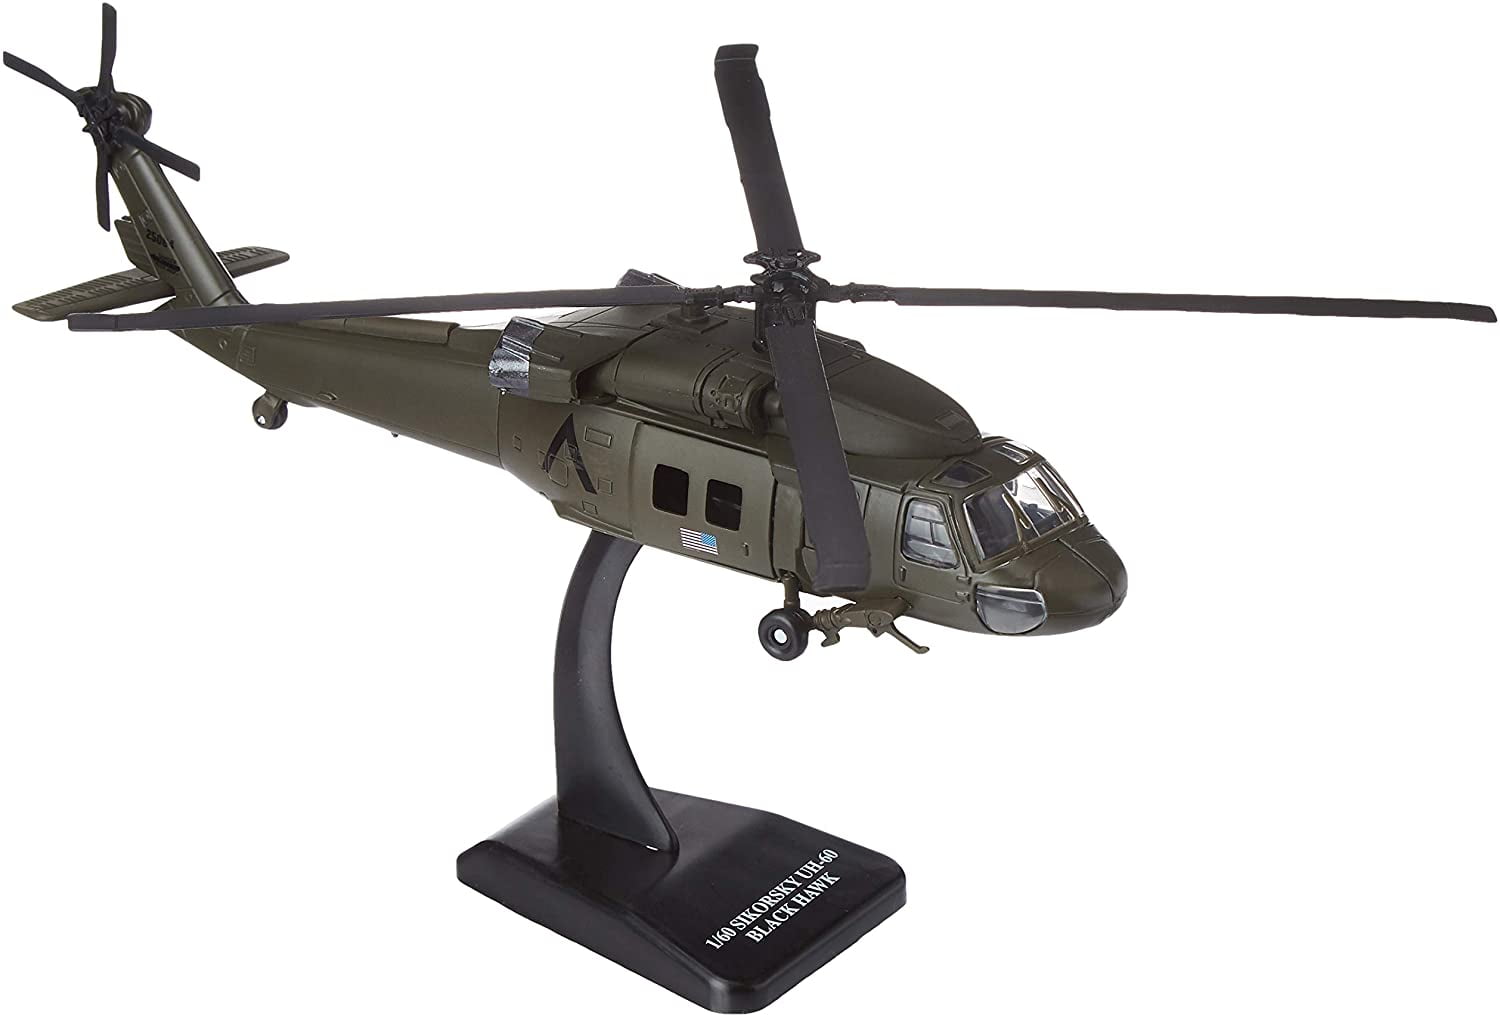 New-Ray 25563A Sikorsky Uh-60 Black Hawk Helicopter  Pack of 12 -  New-Ray Toys Inc